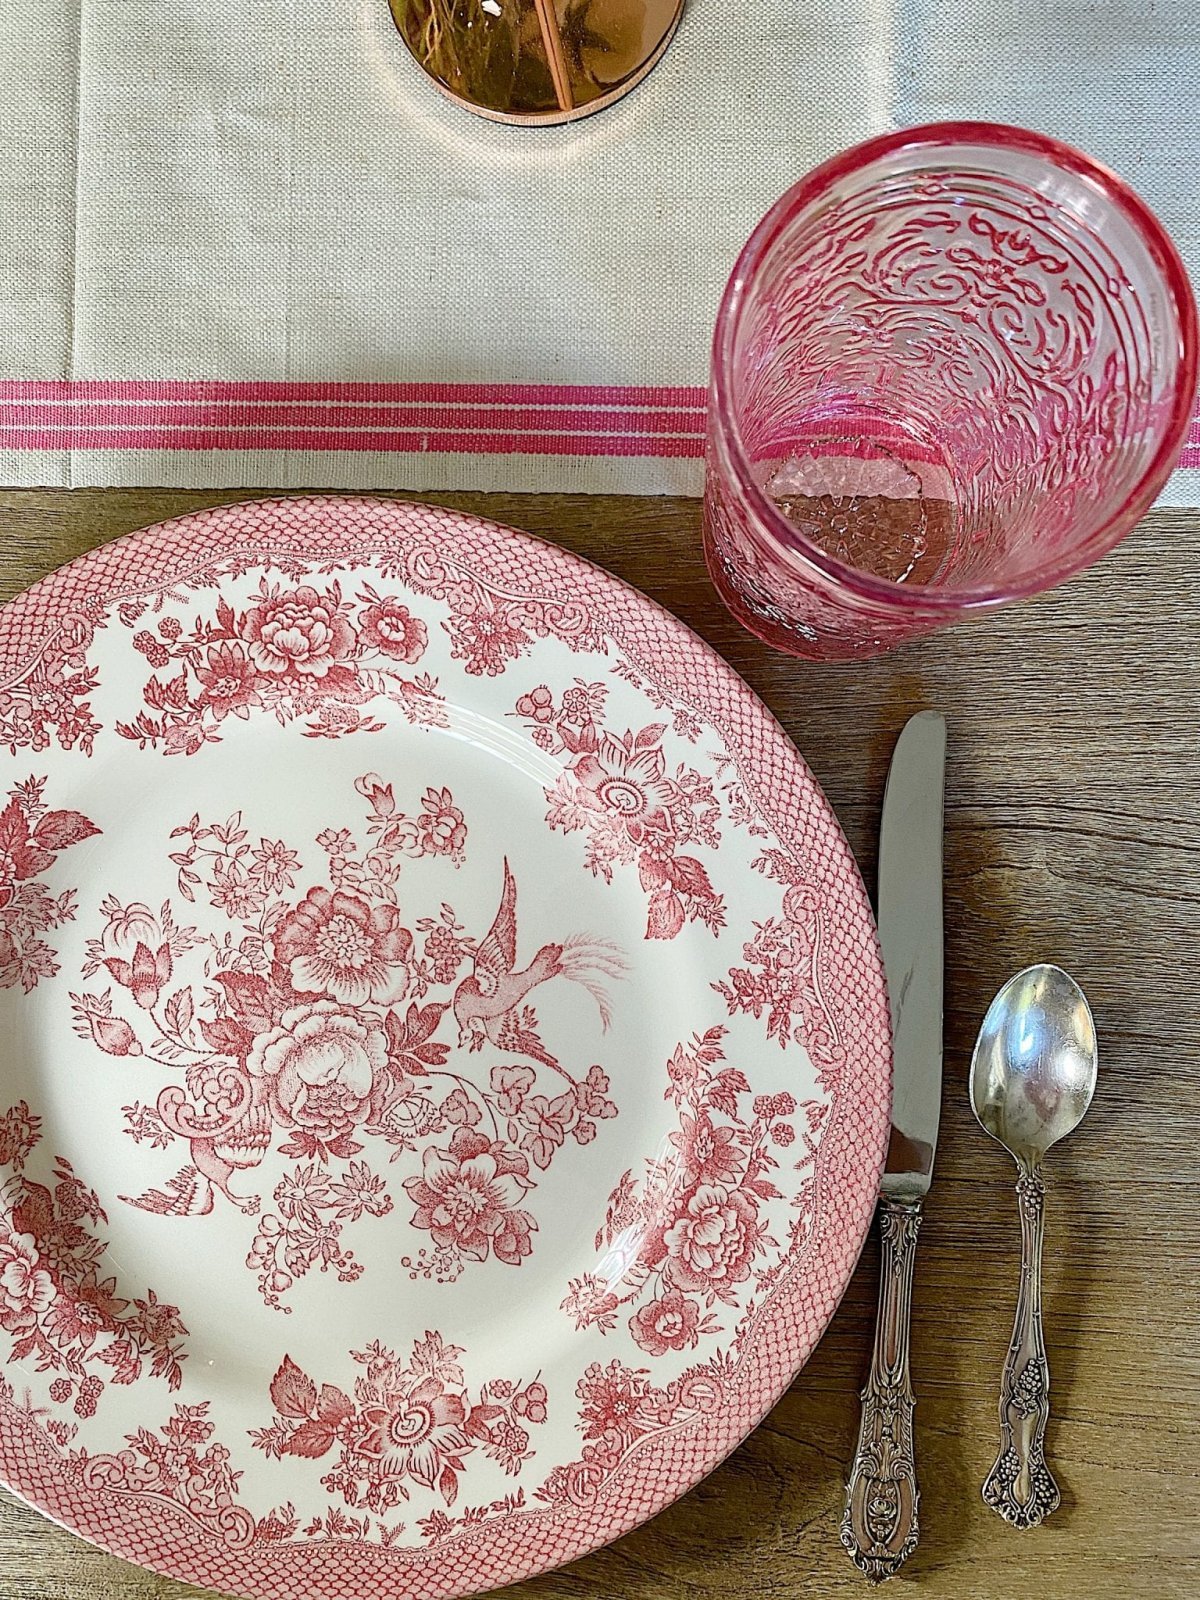 Spring Table with Pink Transferware